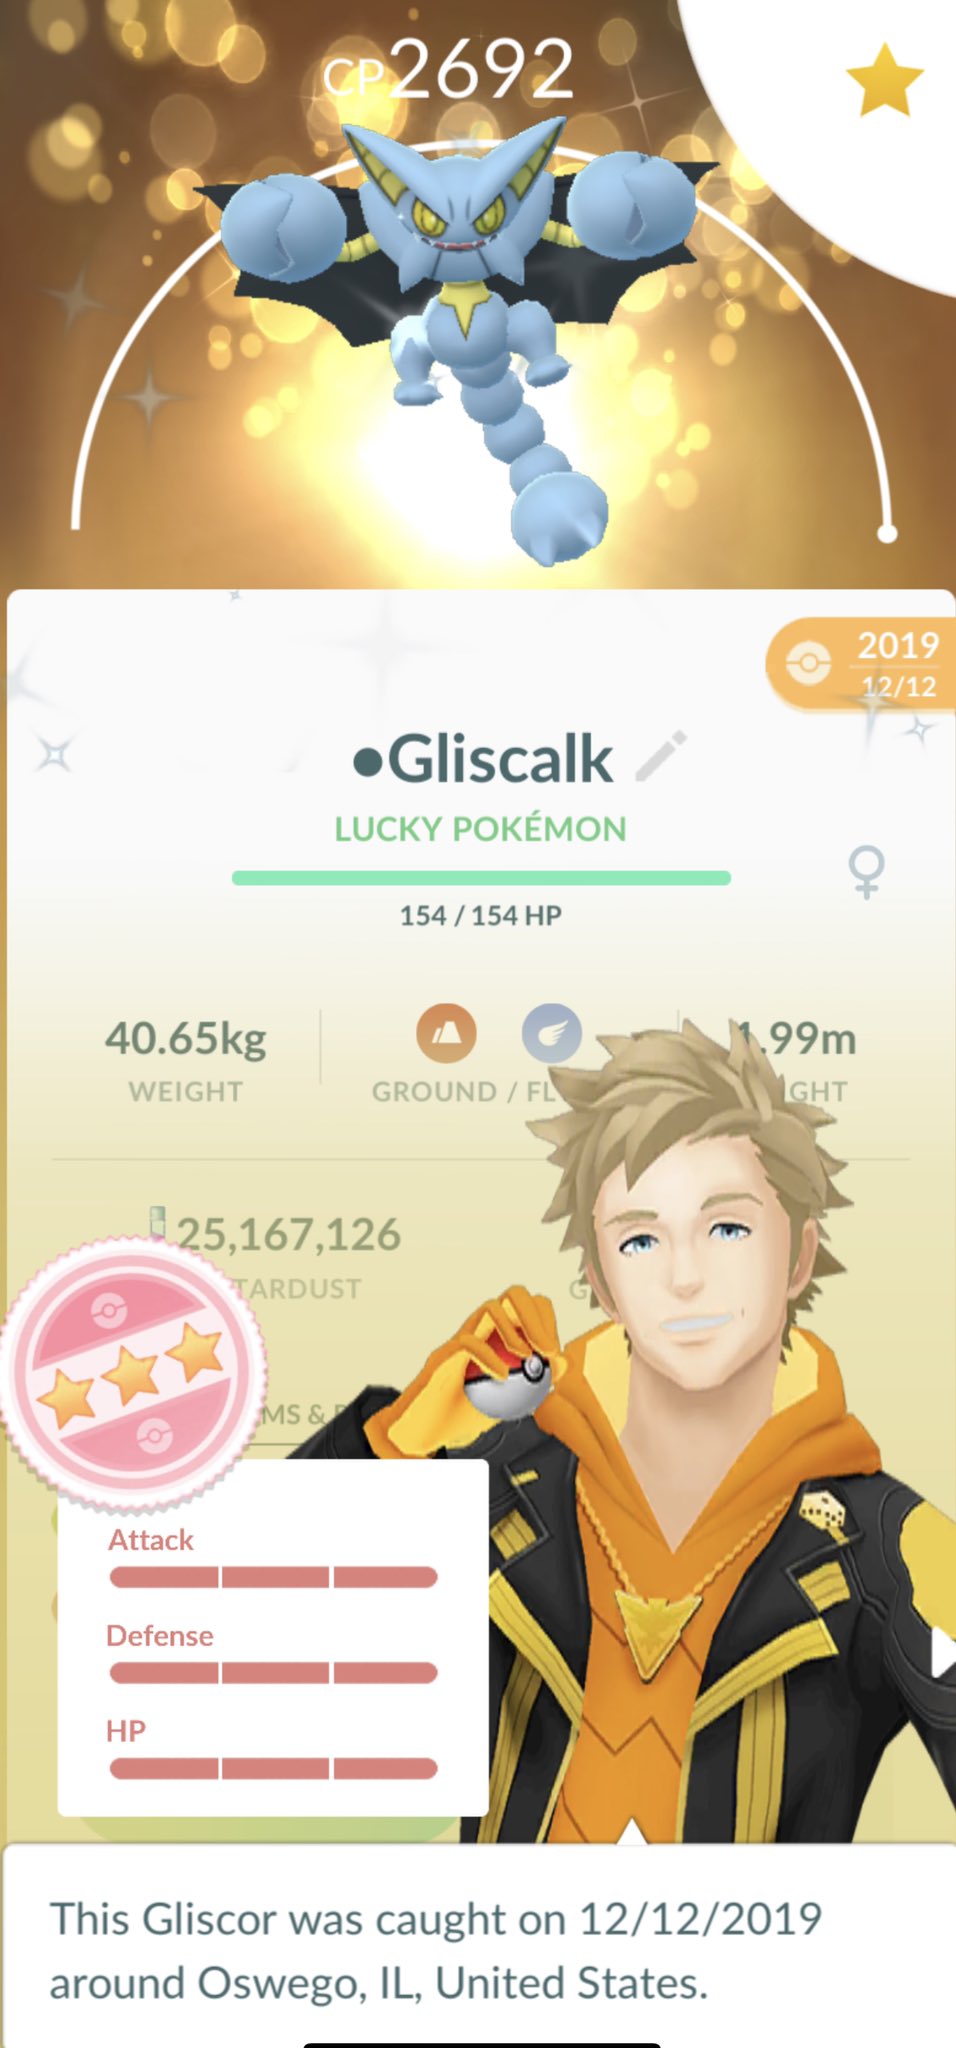 The Trainer Club na platformě X: „🚨 💯 TRAINERS 🏆 🚨 It's #MAXEDoutMONDAY   Celebrate your wins. Post a New Maxed Out Pokemon My 🏆 is a shundo  Gliscor love this Pokémon